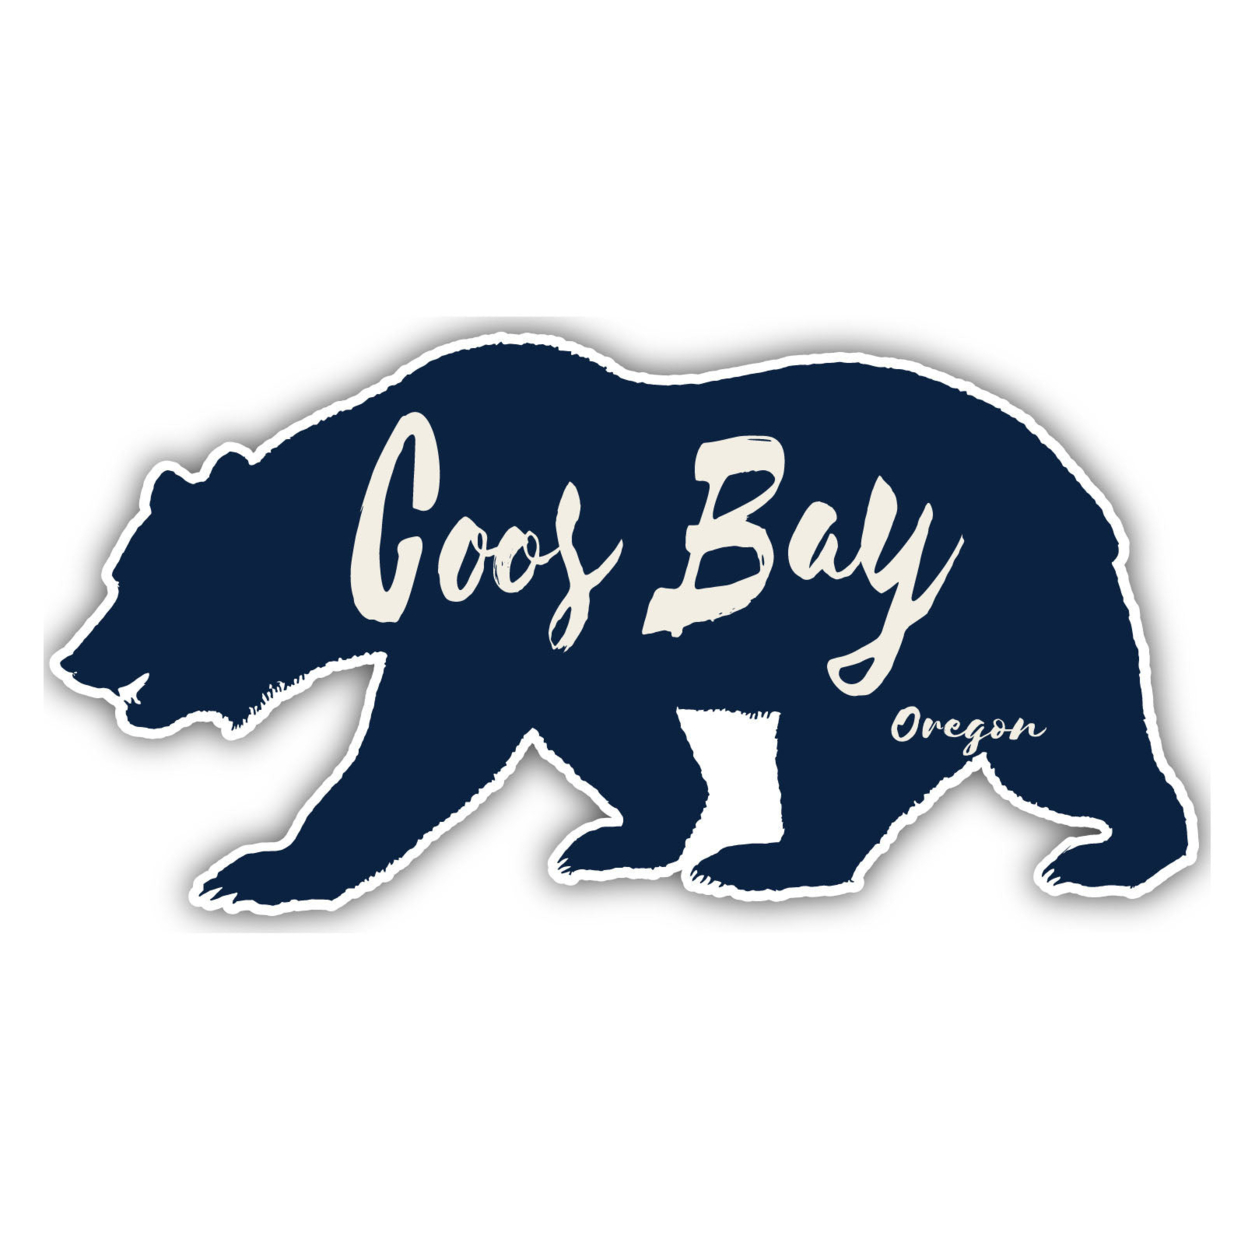 Coos Bay Oregon Souvenir Decorative Stickers (Choose Theme And Size) - 4-Pack, 12-Inch, Adventures Awaits